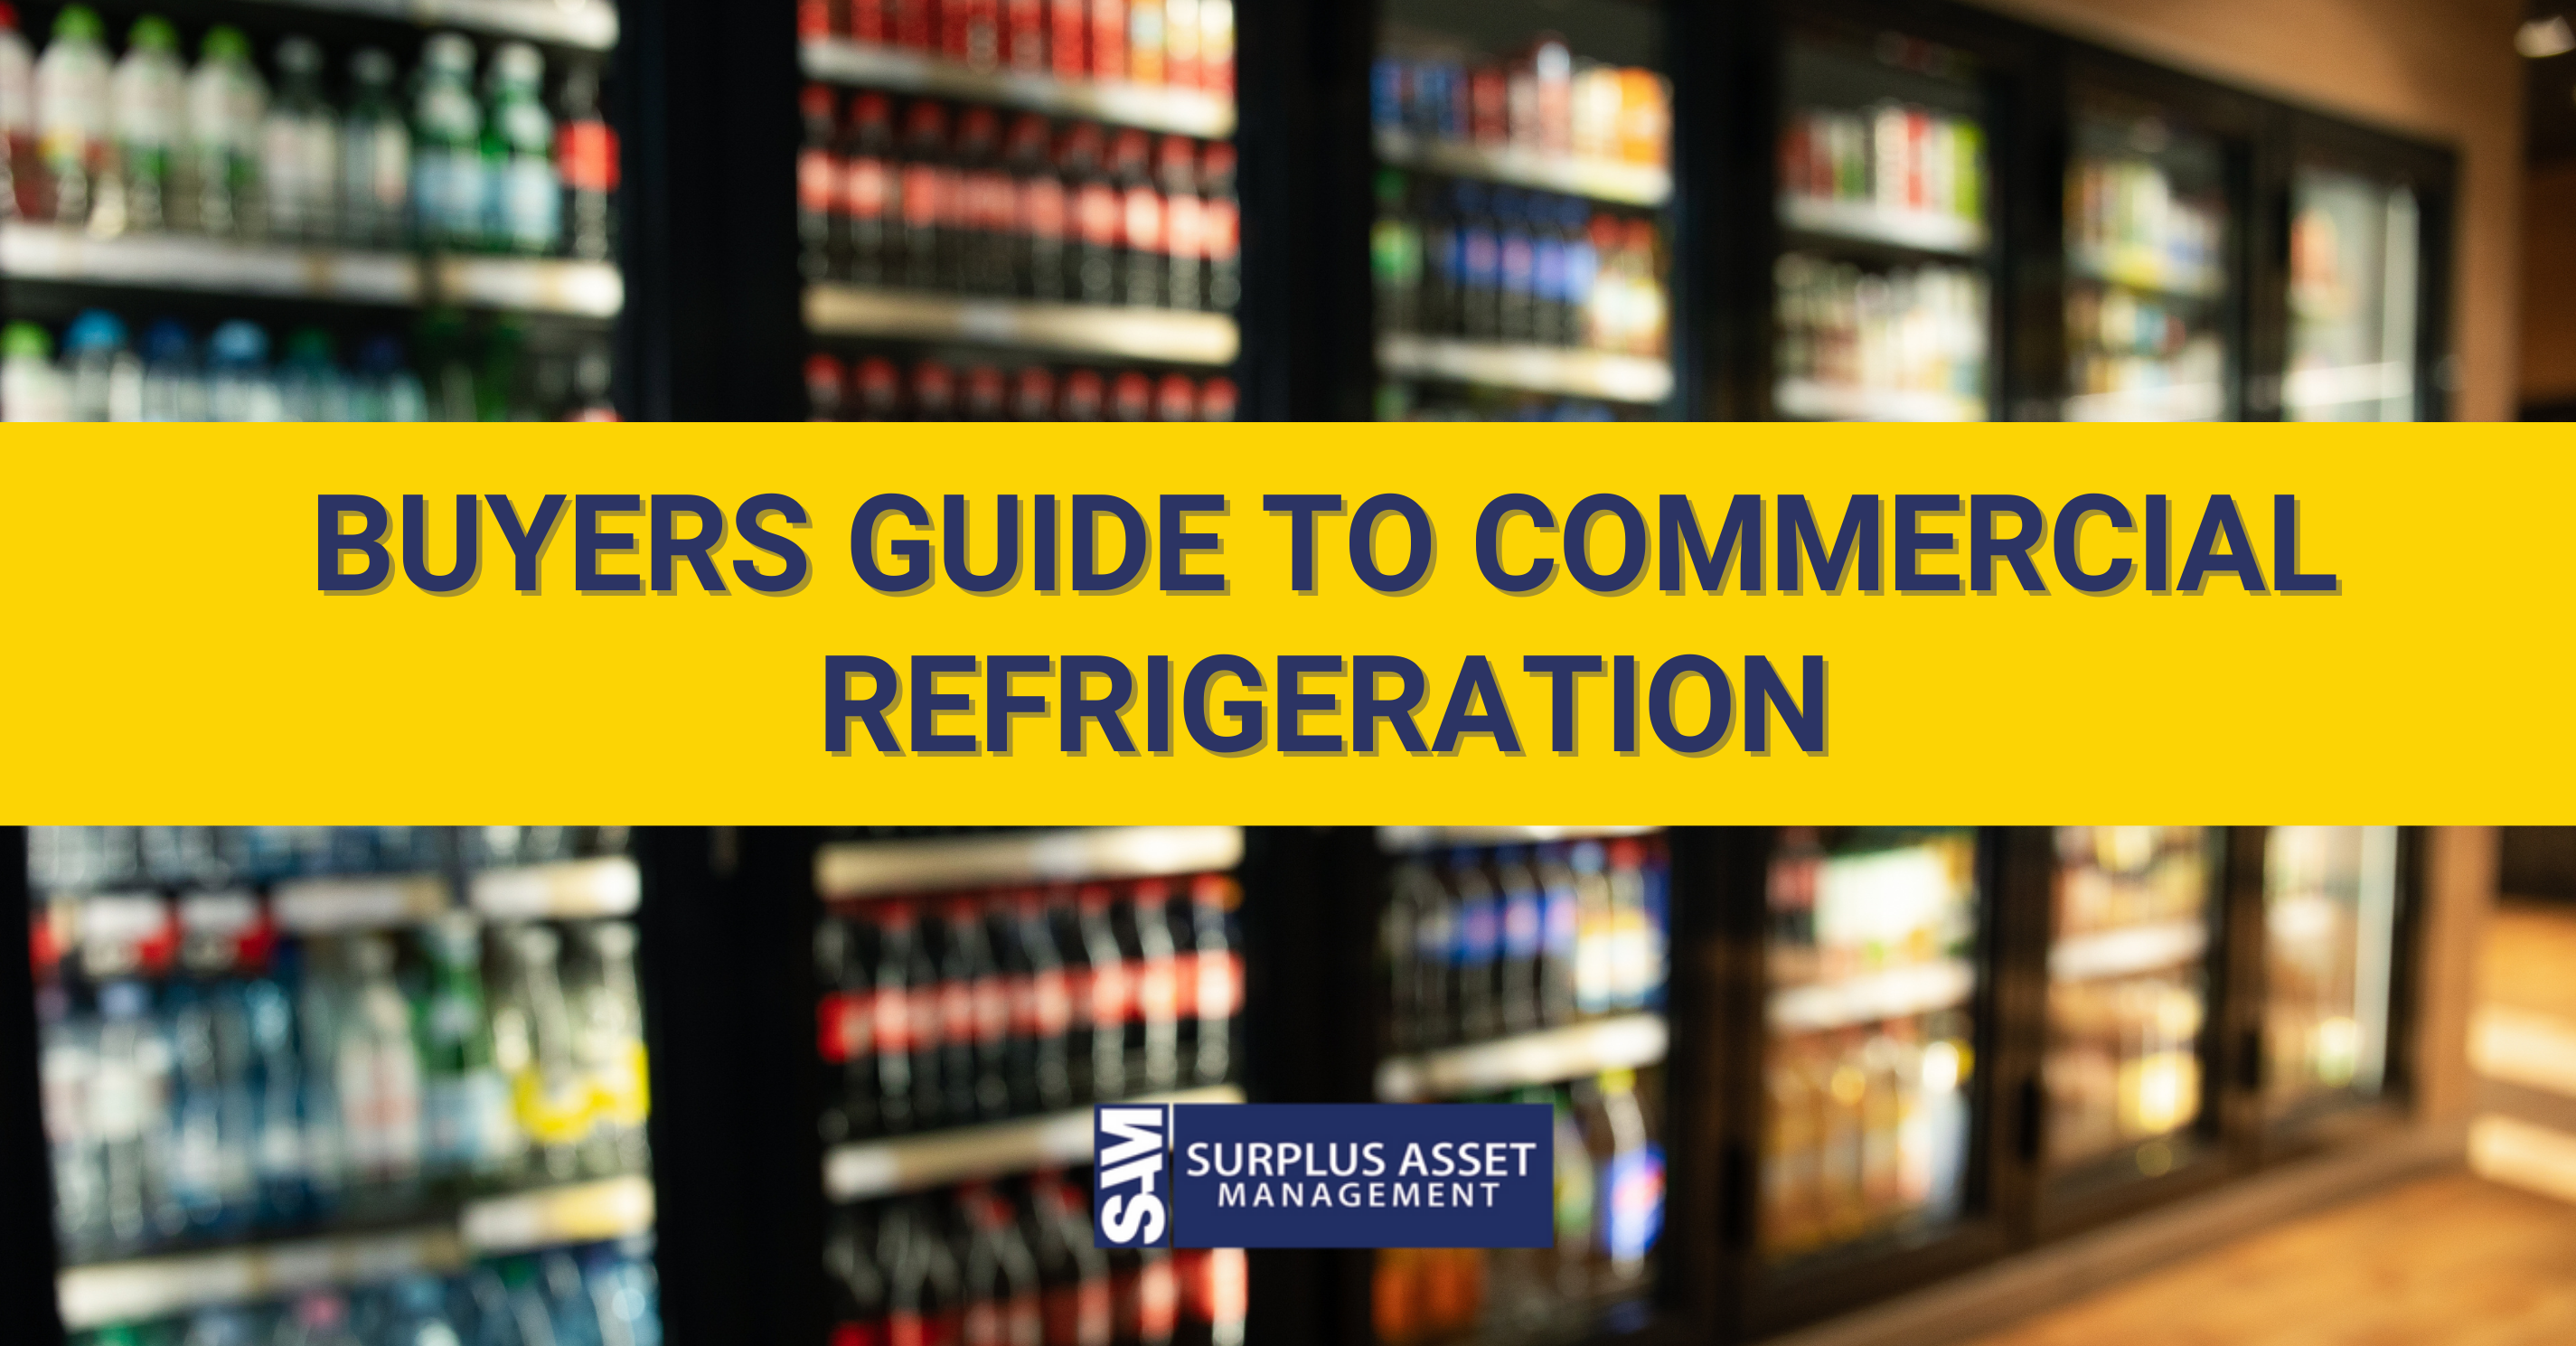 Buyers Guide to Commercial Refrigeration